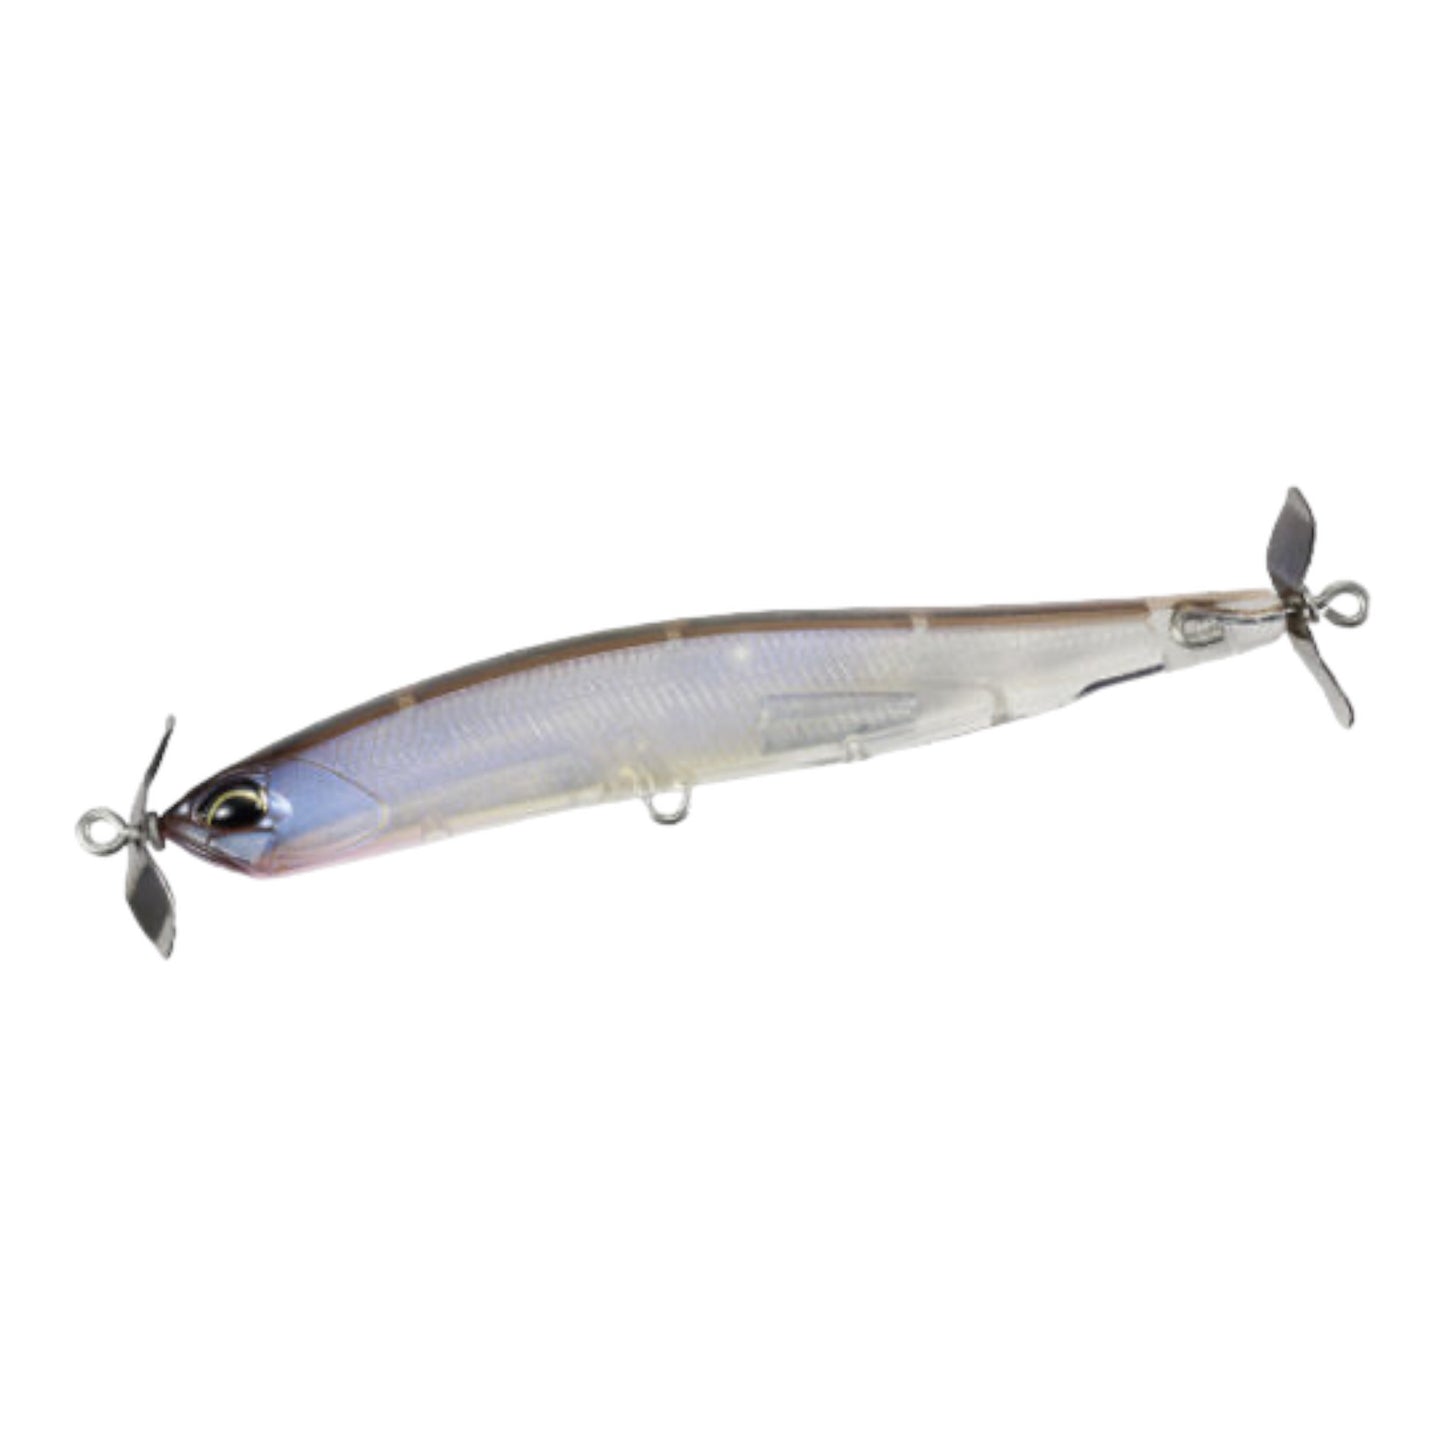 DUO Realis I-Class Series Spinbait 100